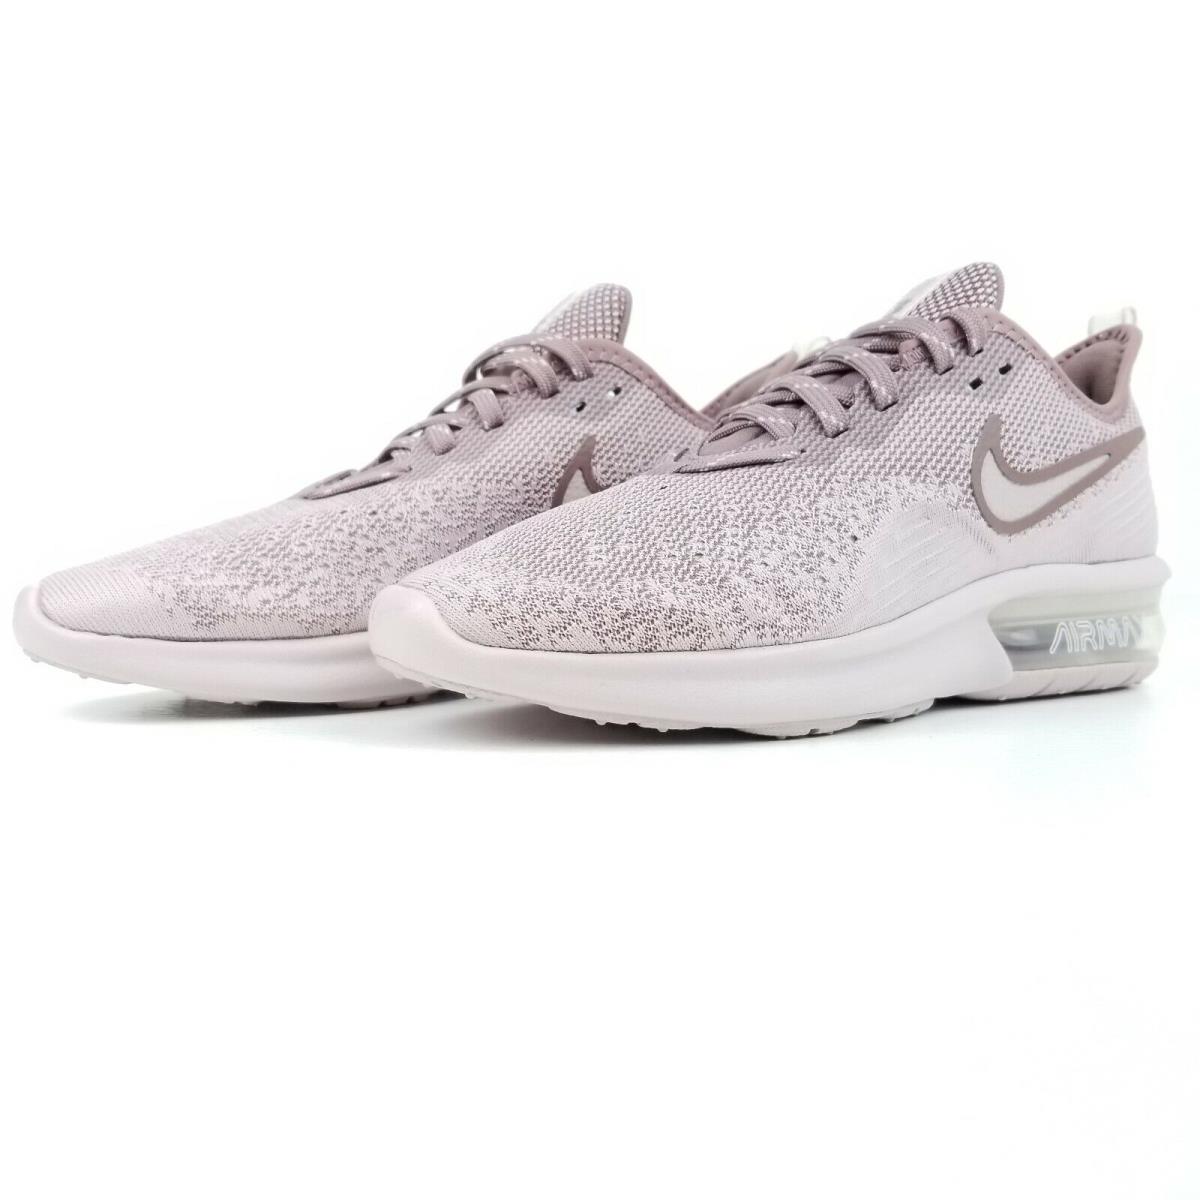 Nike shoes Air Max Sequent - Rose Pink 0